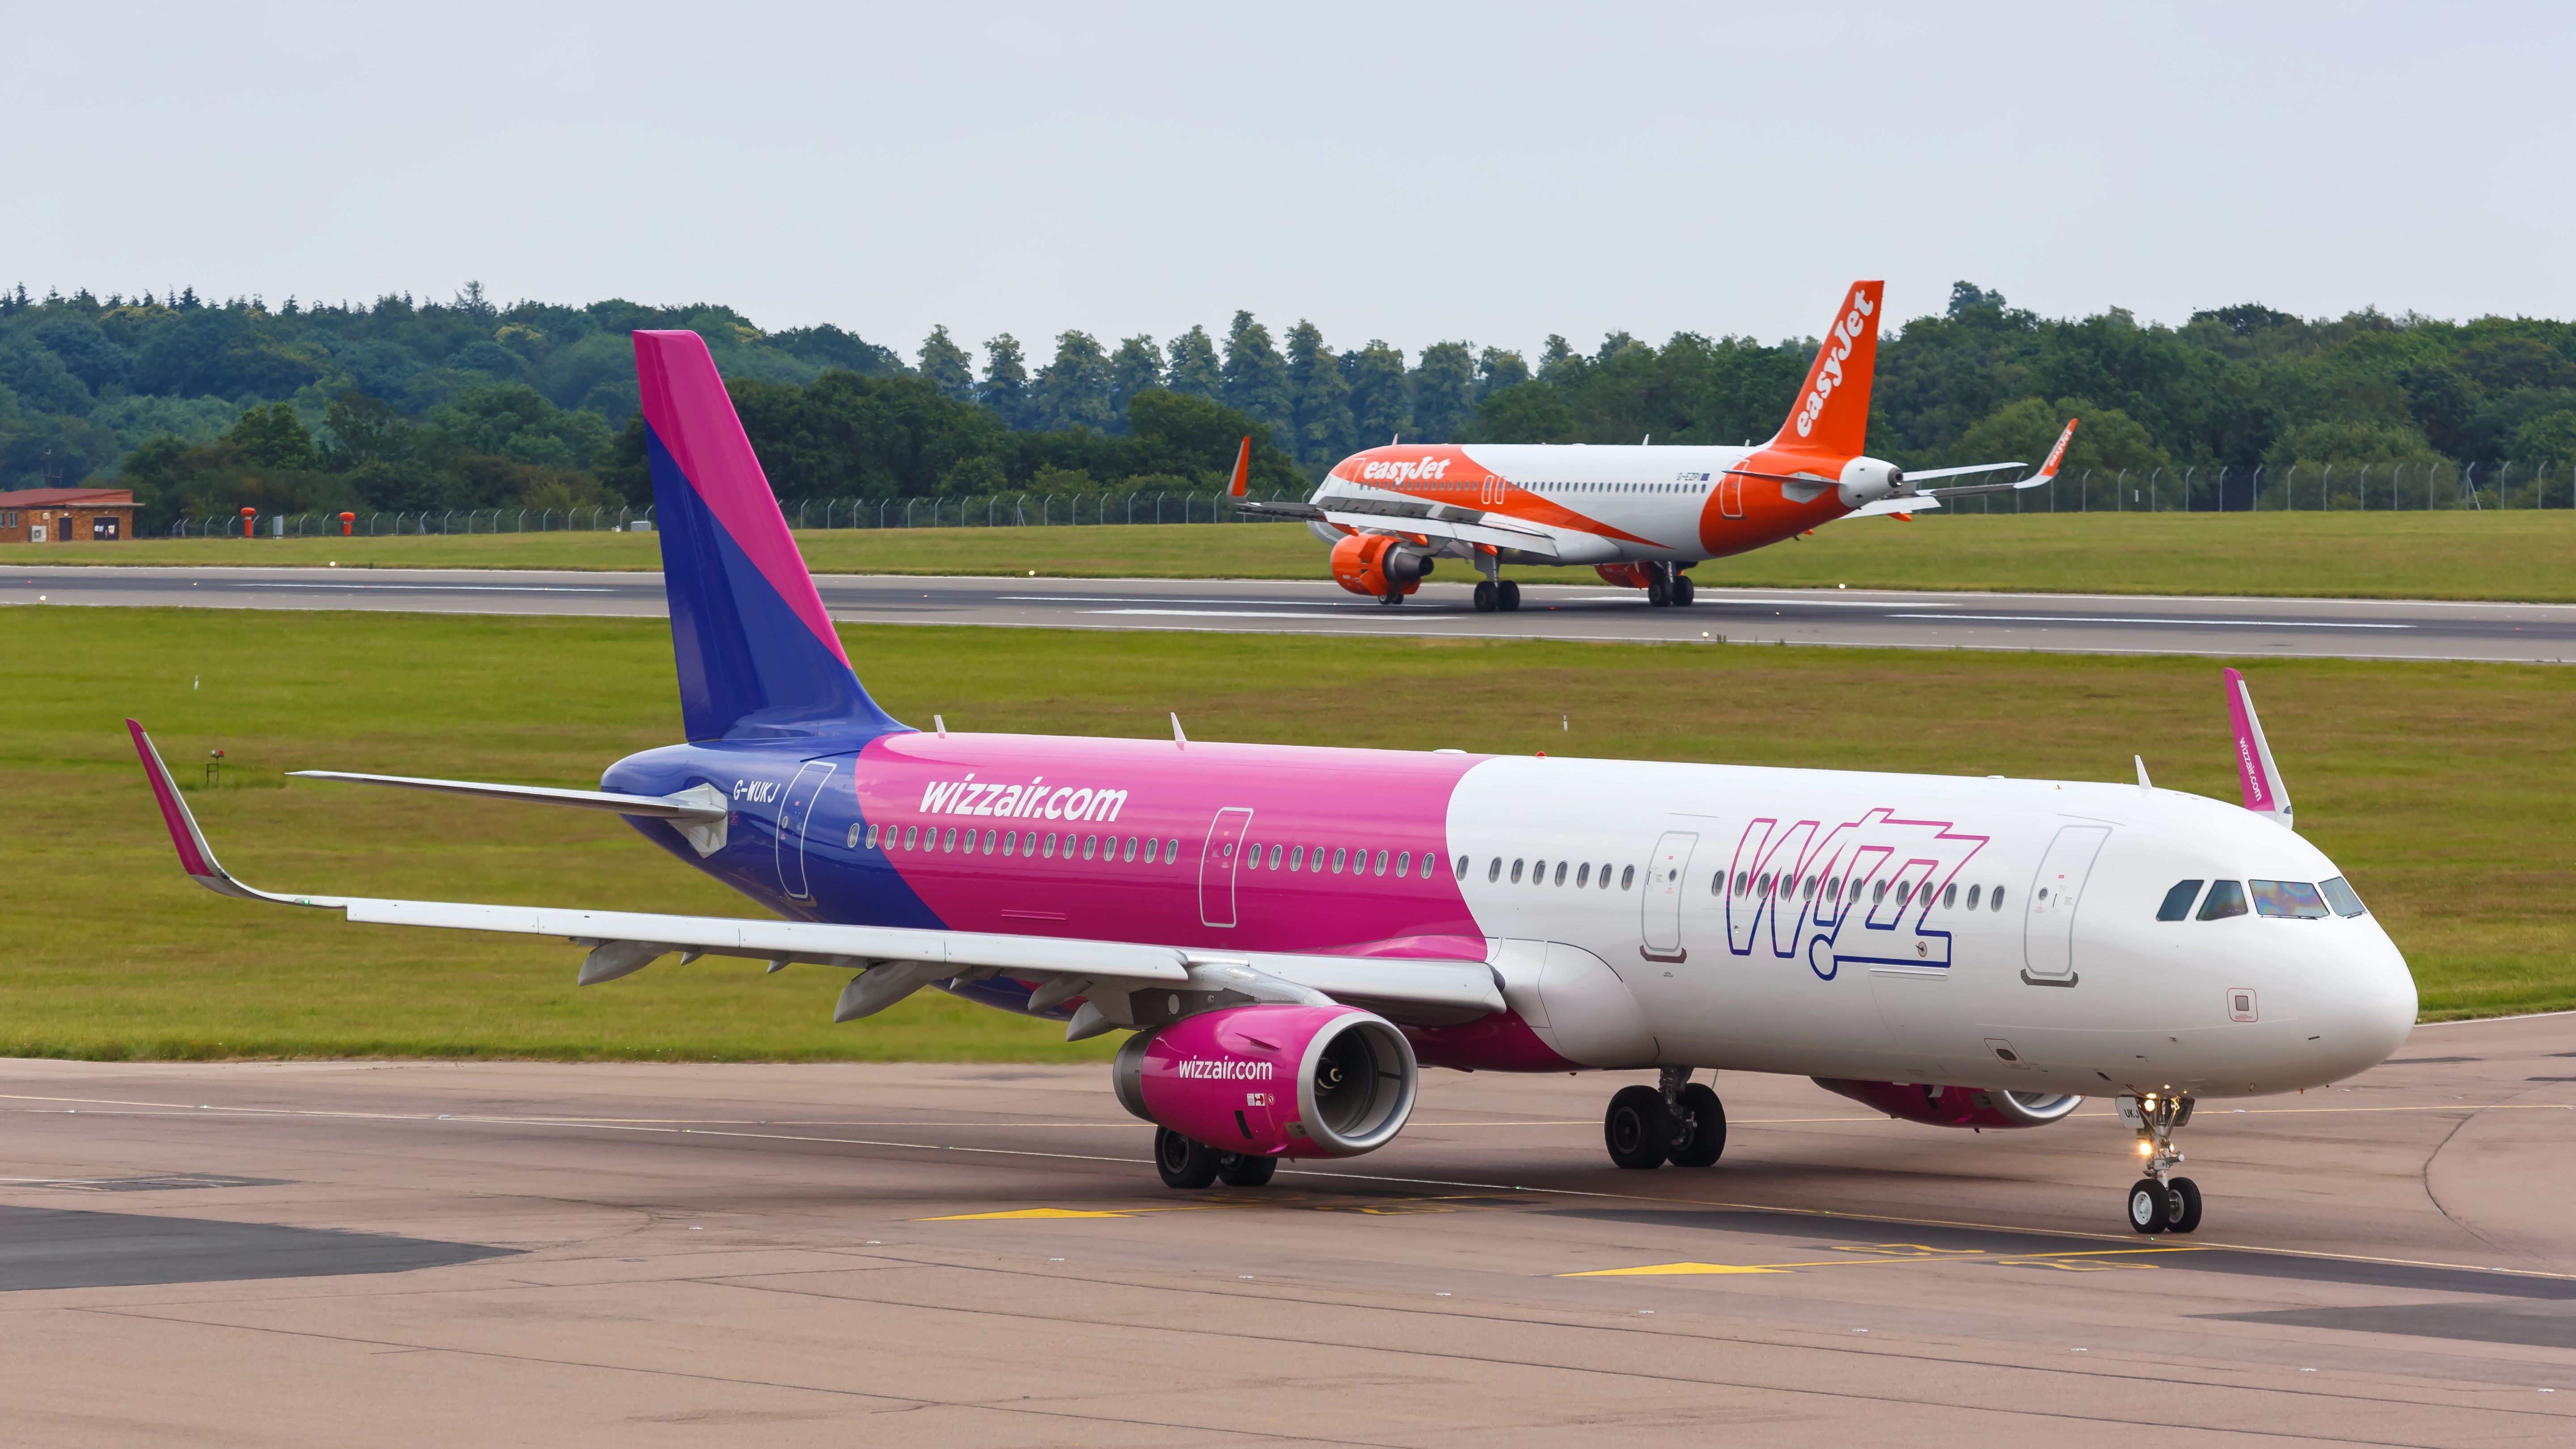 Wizz Air Airbus A321 With easyJet Airbus A320 Behind